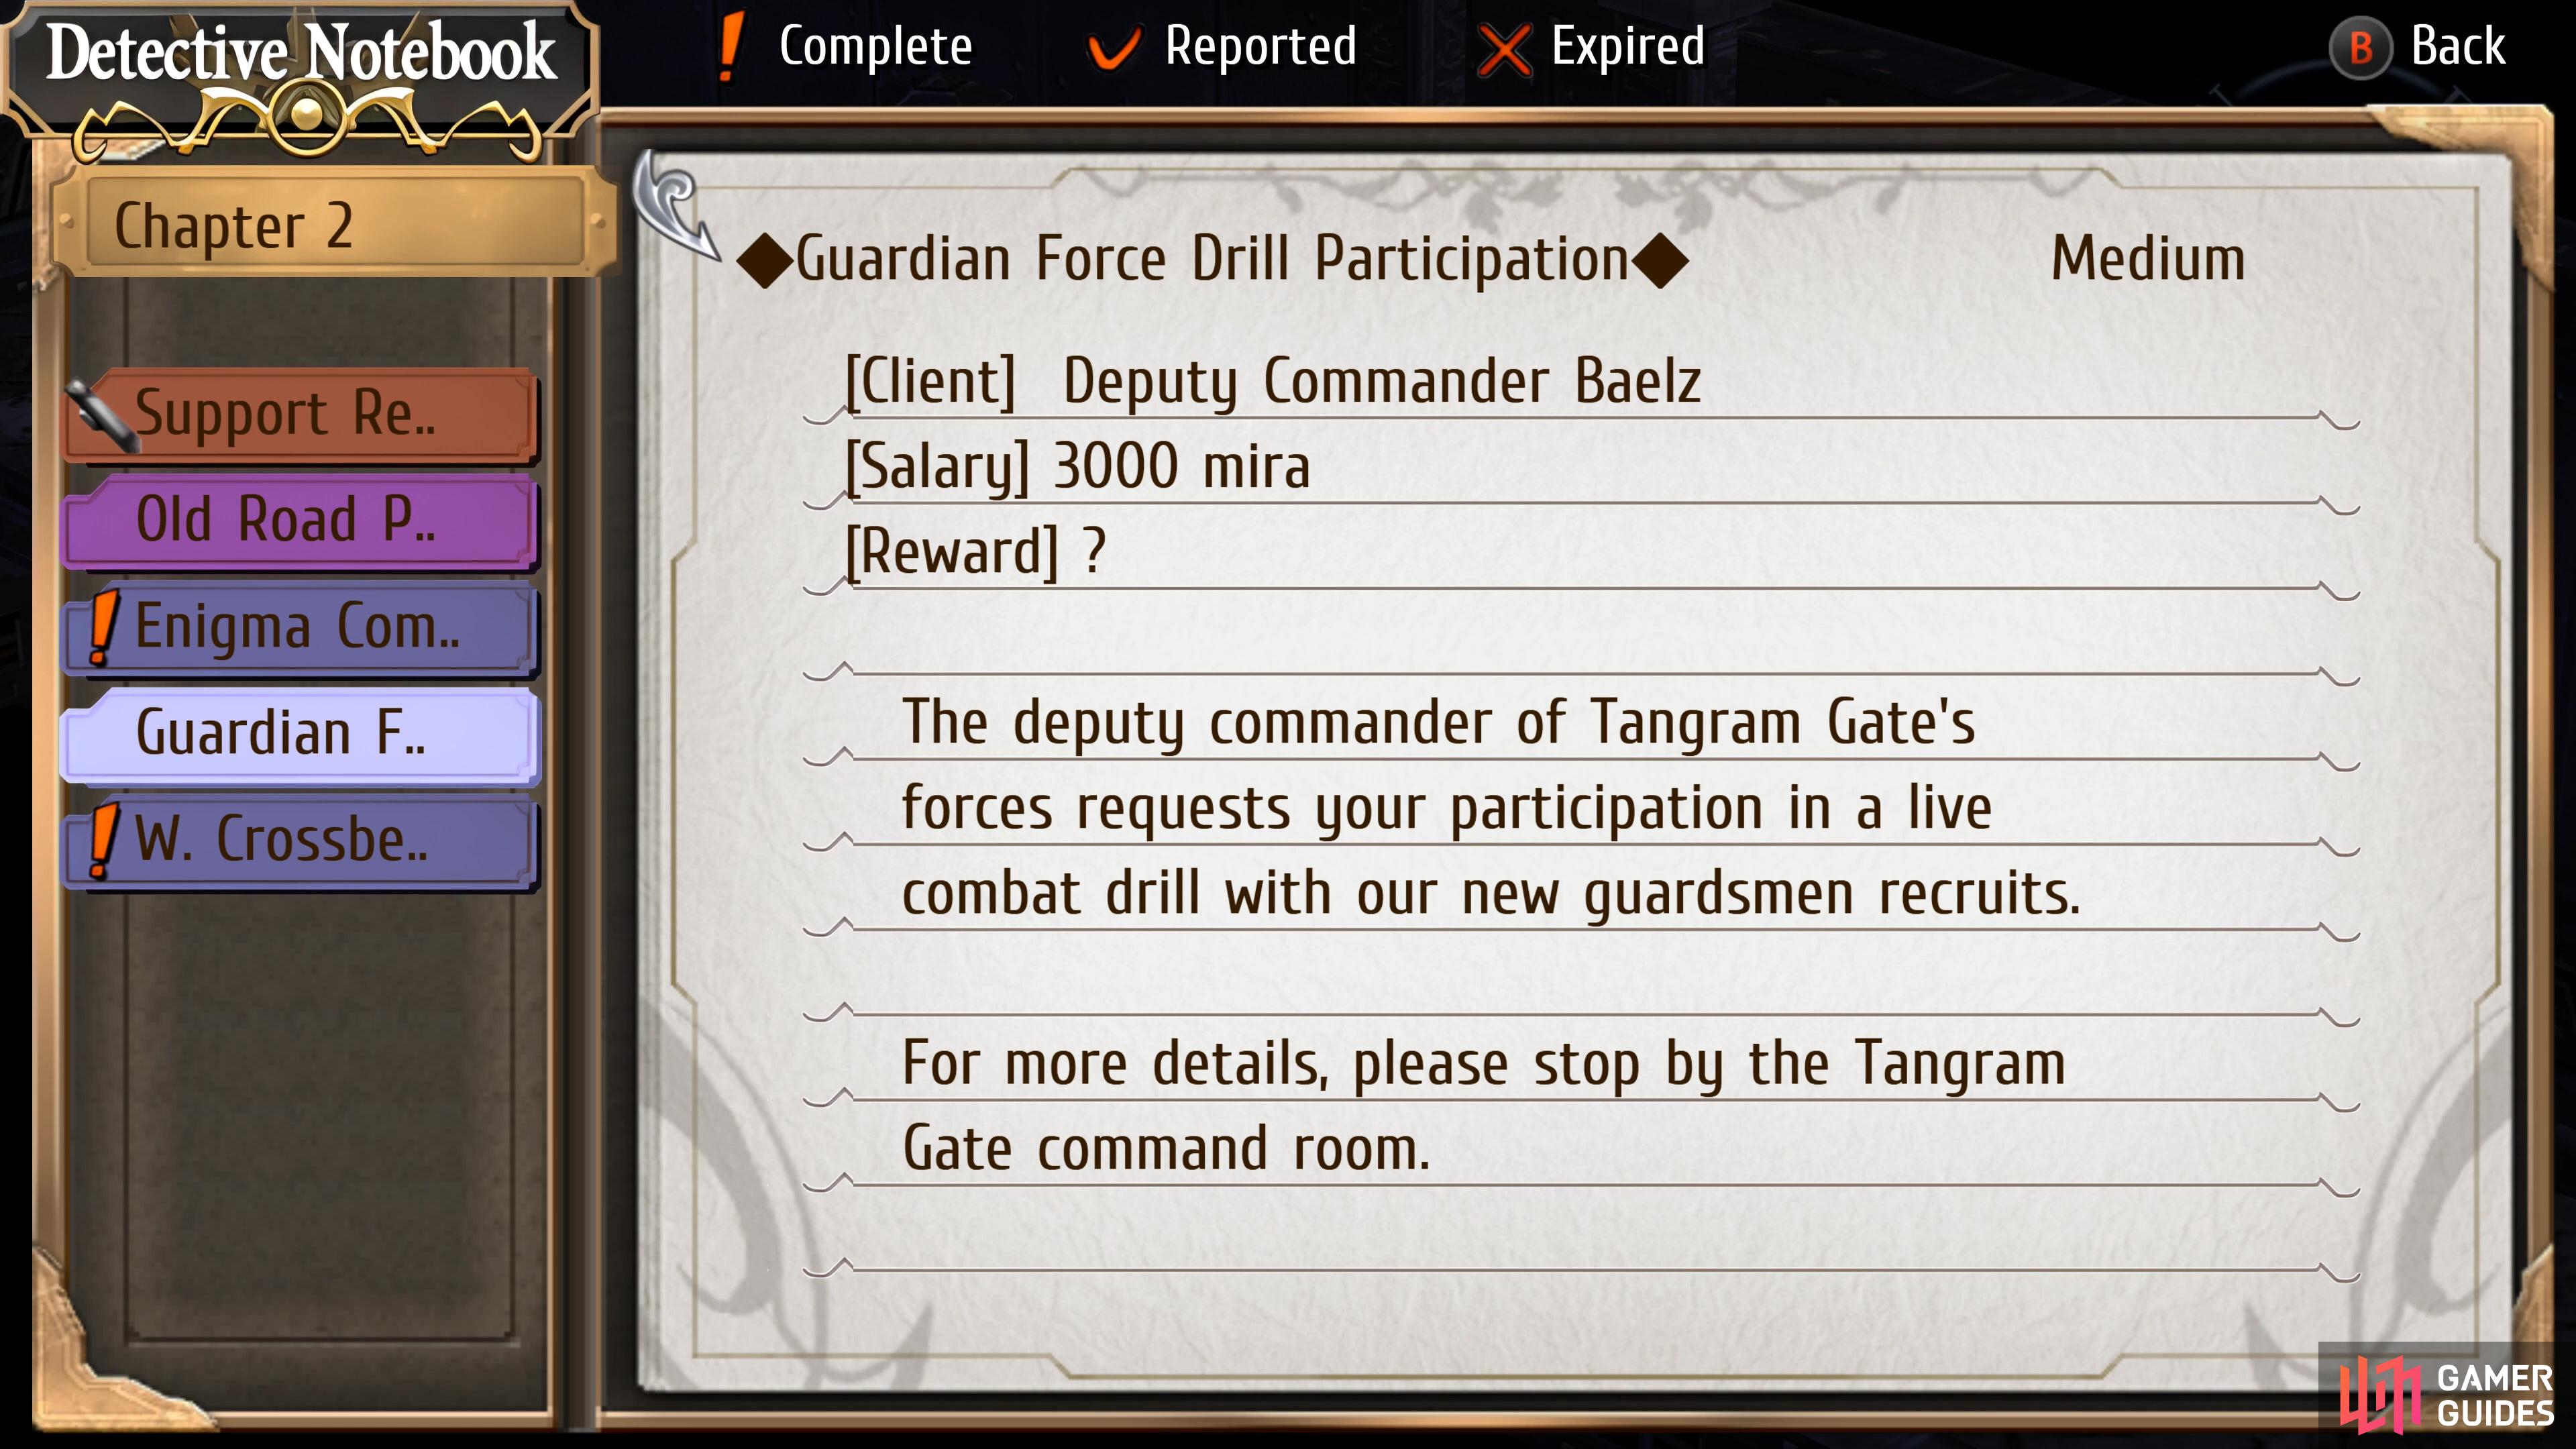 Guardian Force Drill Participation is a Request at Tangram Gate in Chapter 2 Day 1.